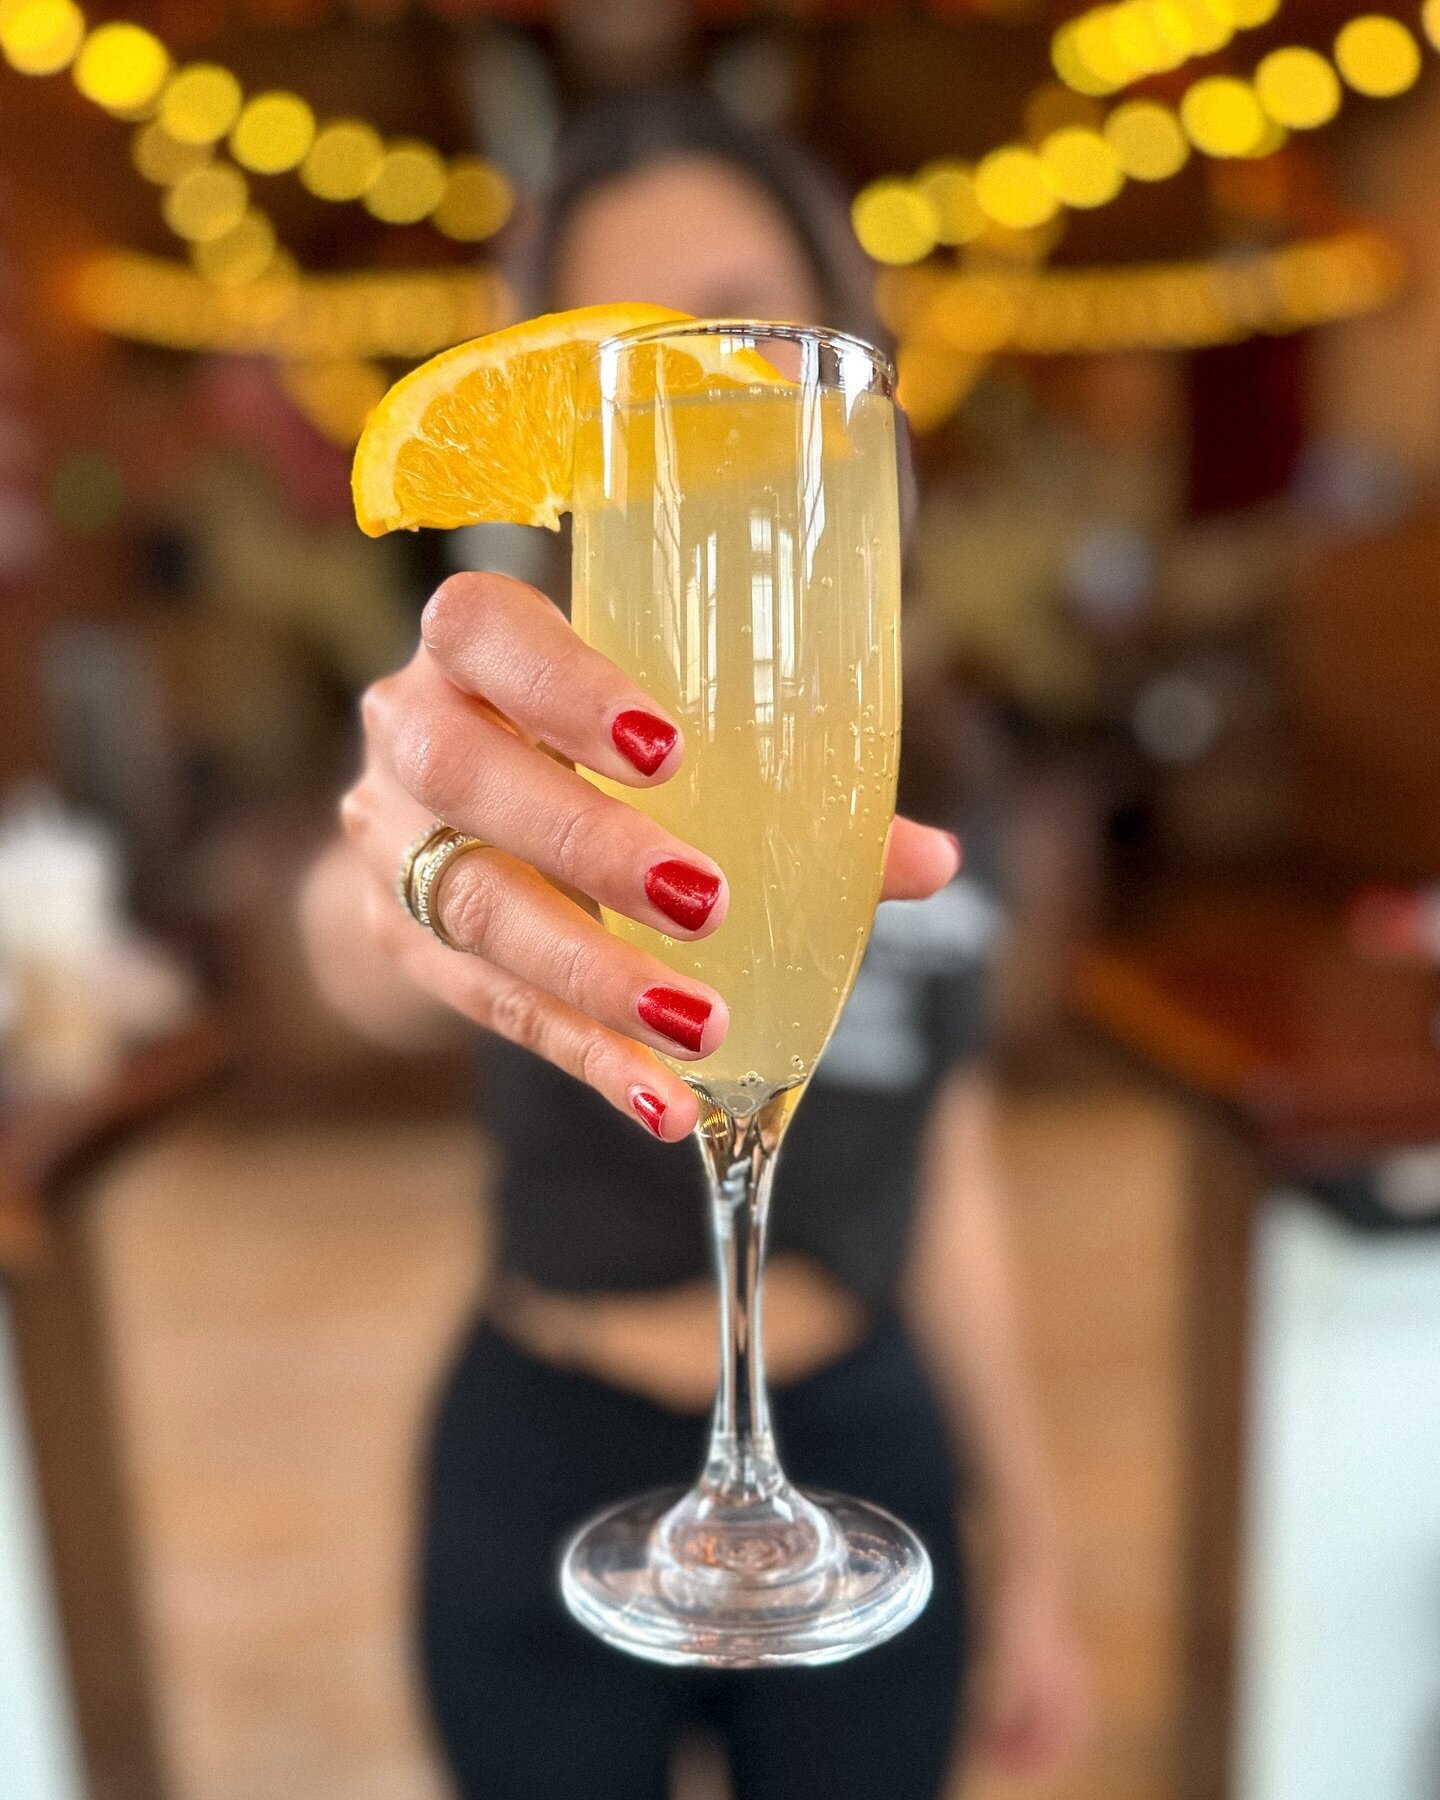 Saturdays &gt;&gt;&gt;&gt;&gt;&gt; New hours: Open at 11am today!
$3 Mimosas from 12-2pm followed by our Saturday specials! 🍊🧡💛
&bull;
&bull;
&bull;
&bull;
#nj #njeats #njfood #njbar #njfoodie #njcocktails #northnj #njblogger #saturday #weekend #o